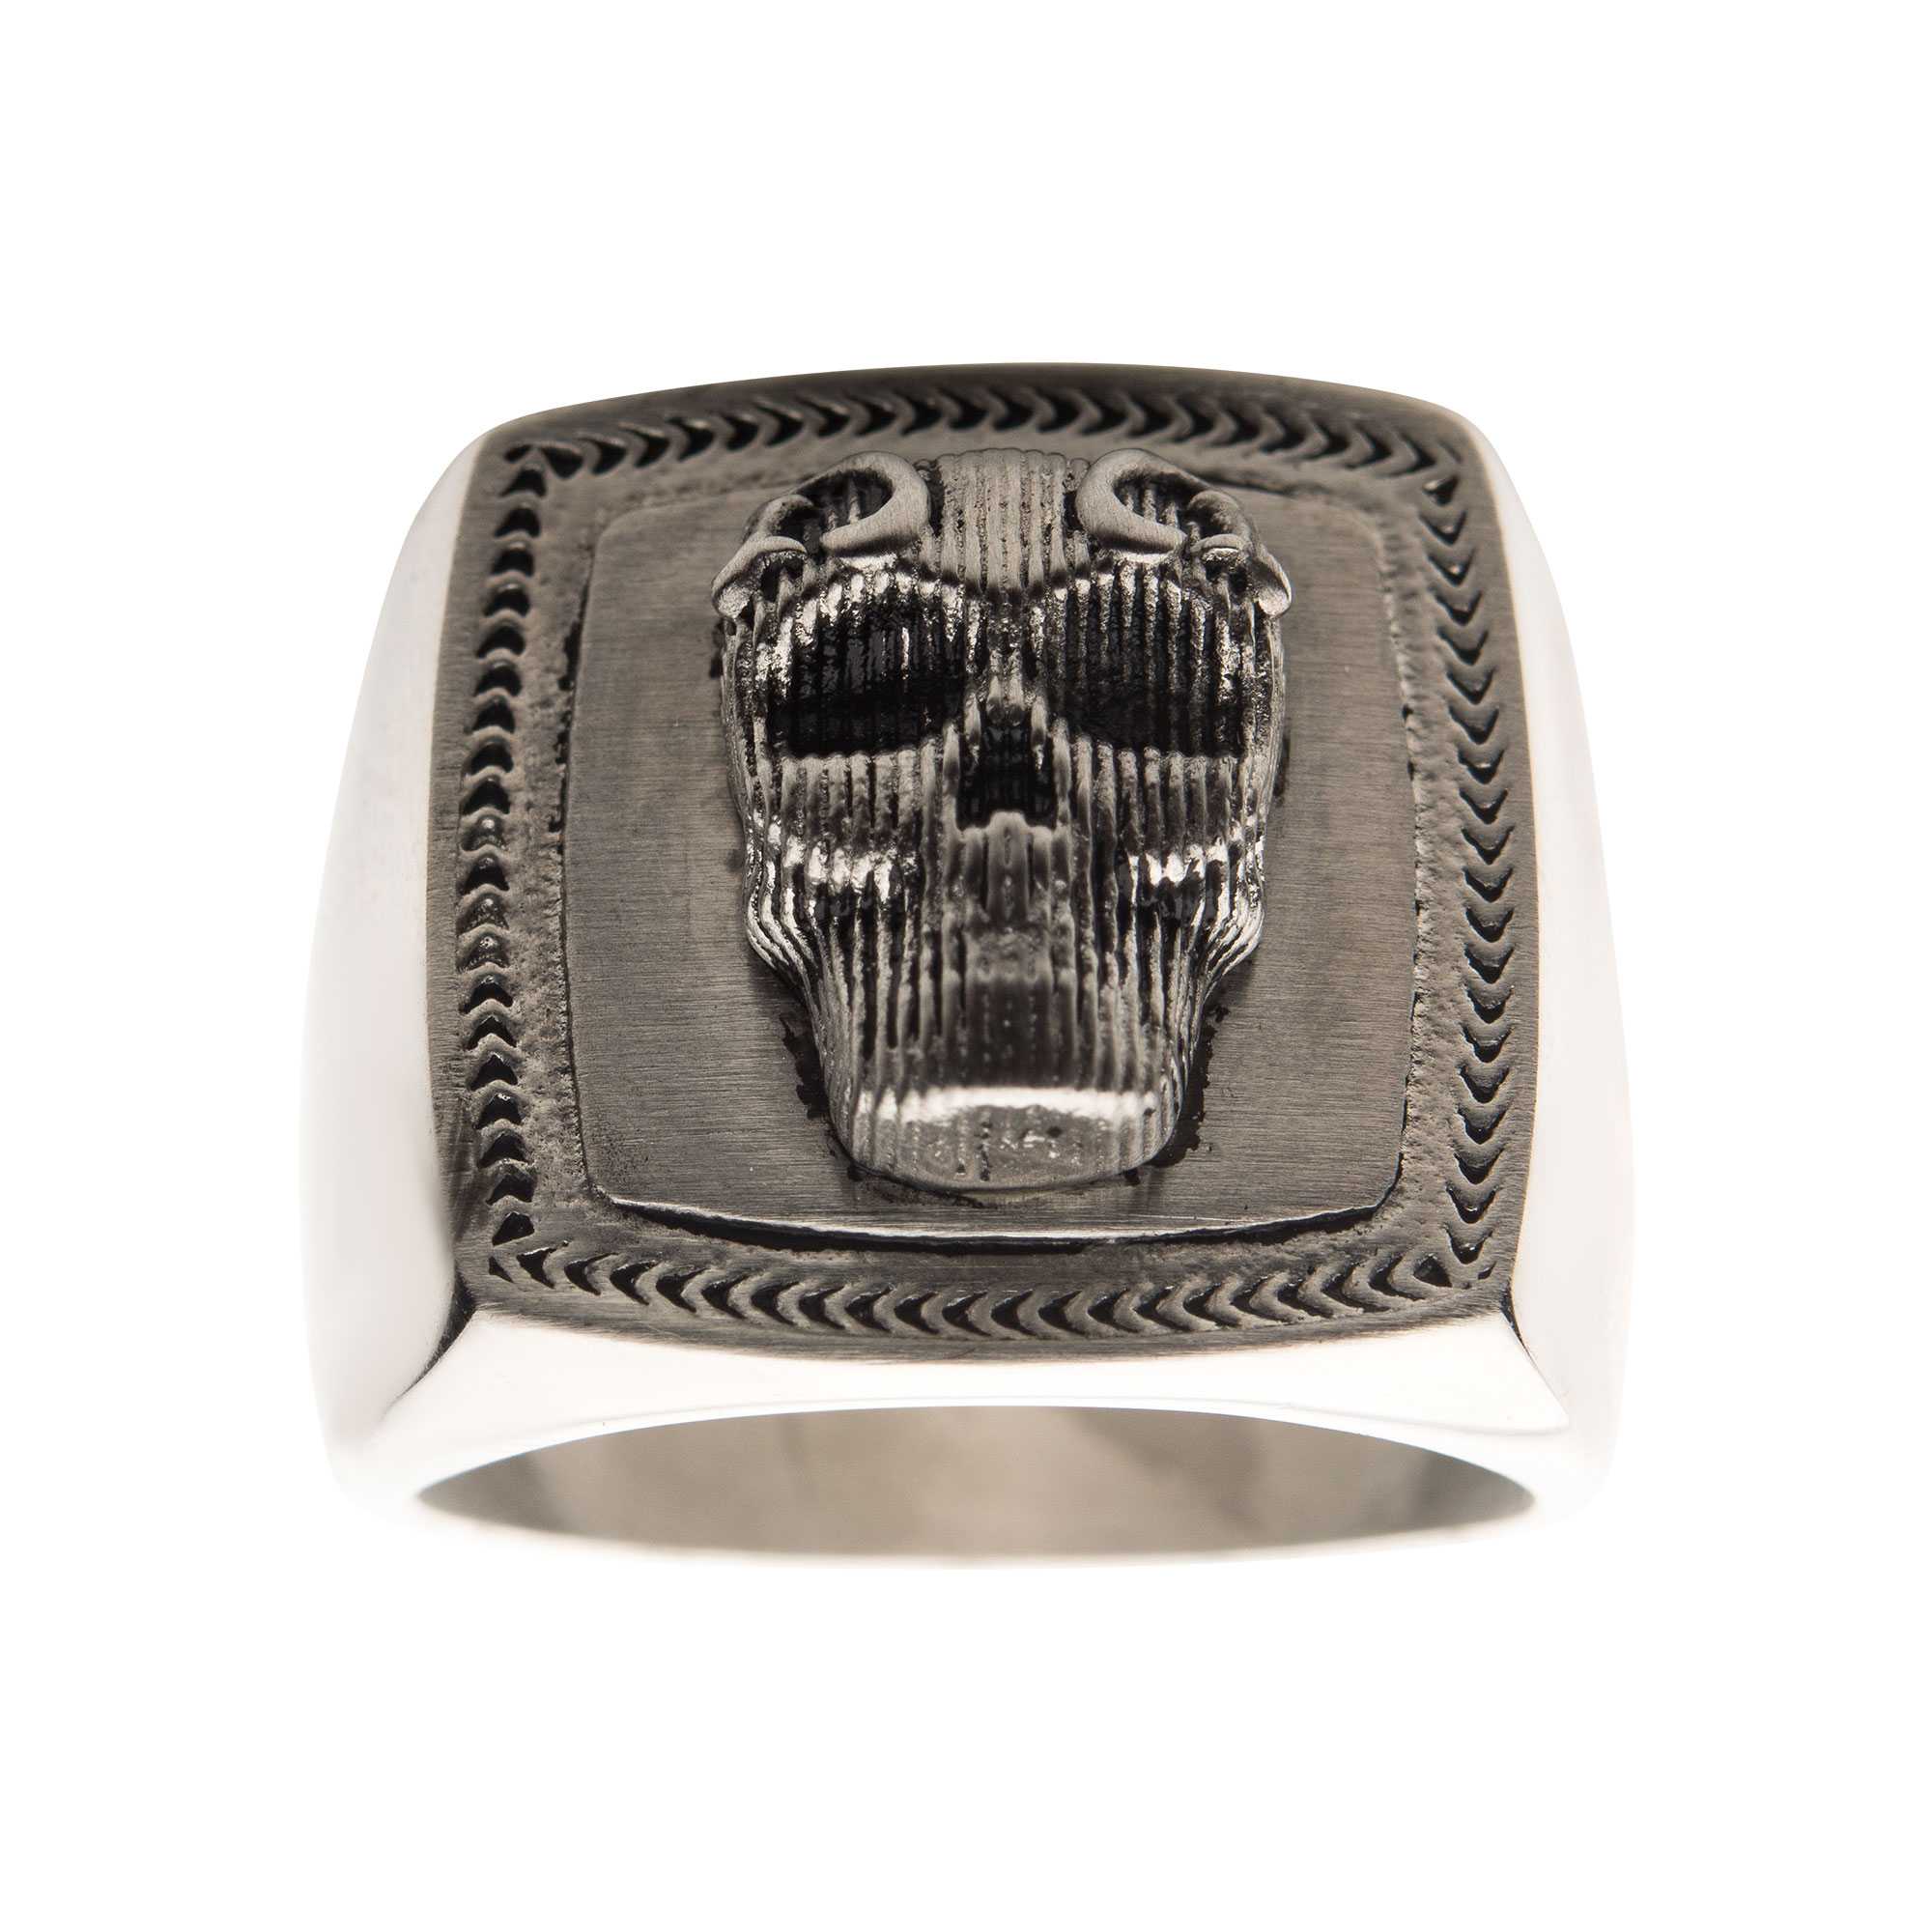 Black Oxidized Matte Finish Steel 3D Skull Ring Image 2 Enchanted Jewelry Plainfield, CT